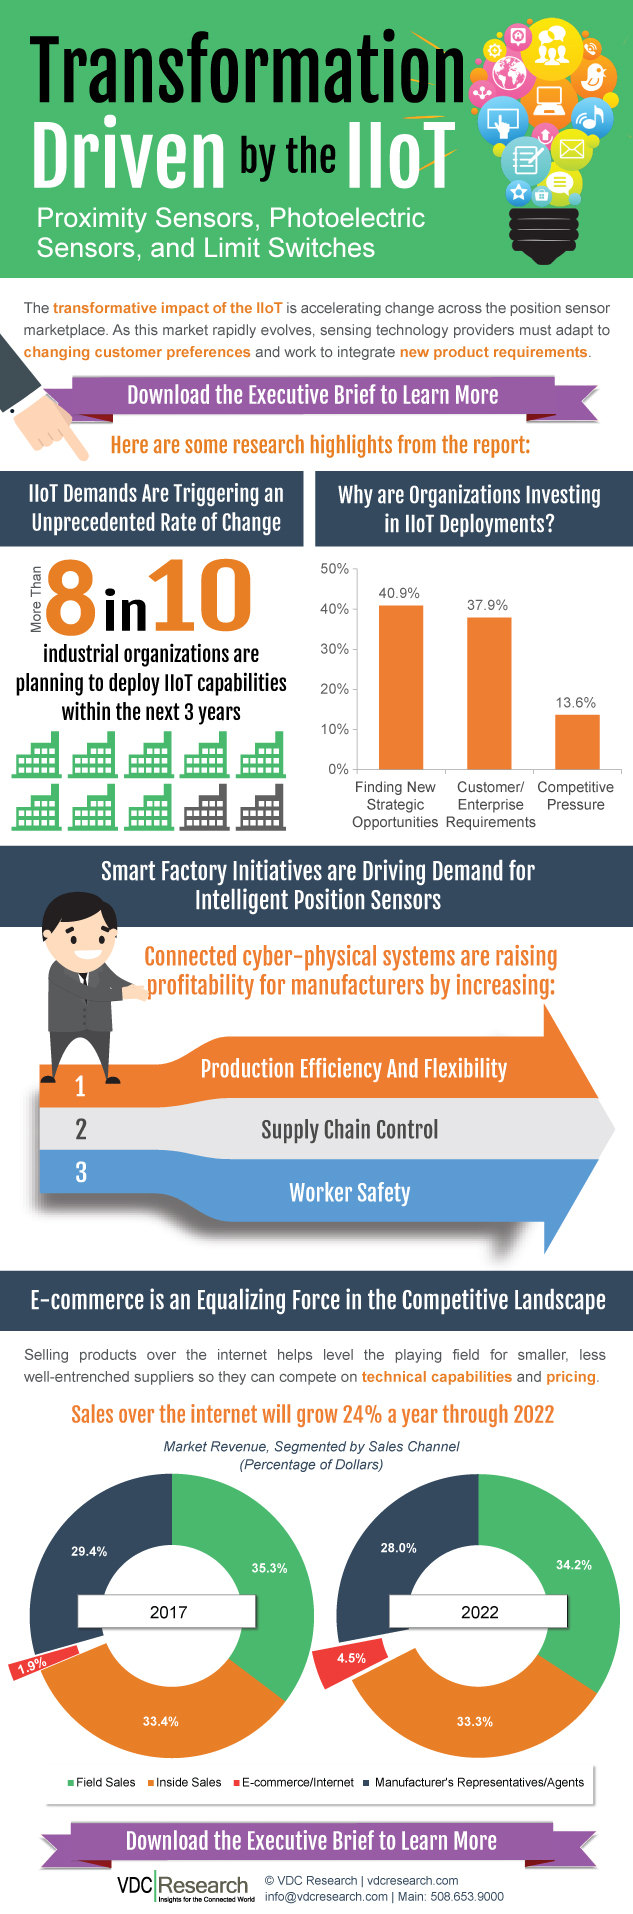 Transformation Driven by the IIoT